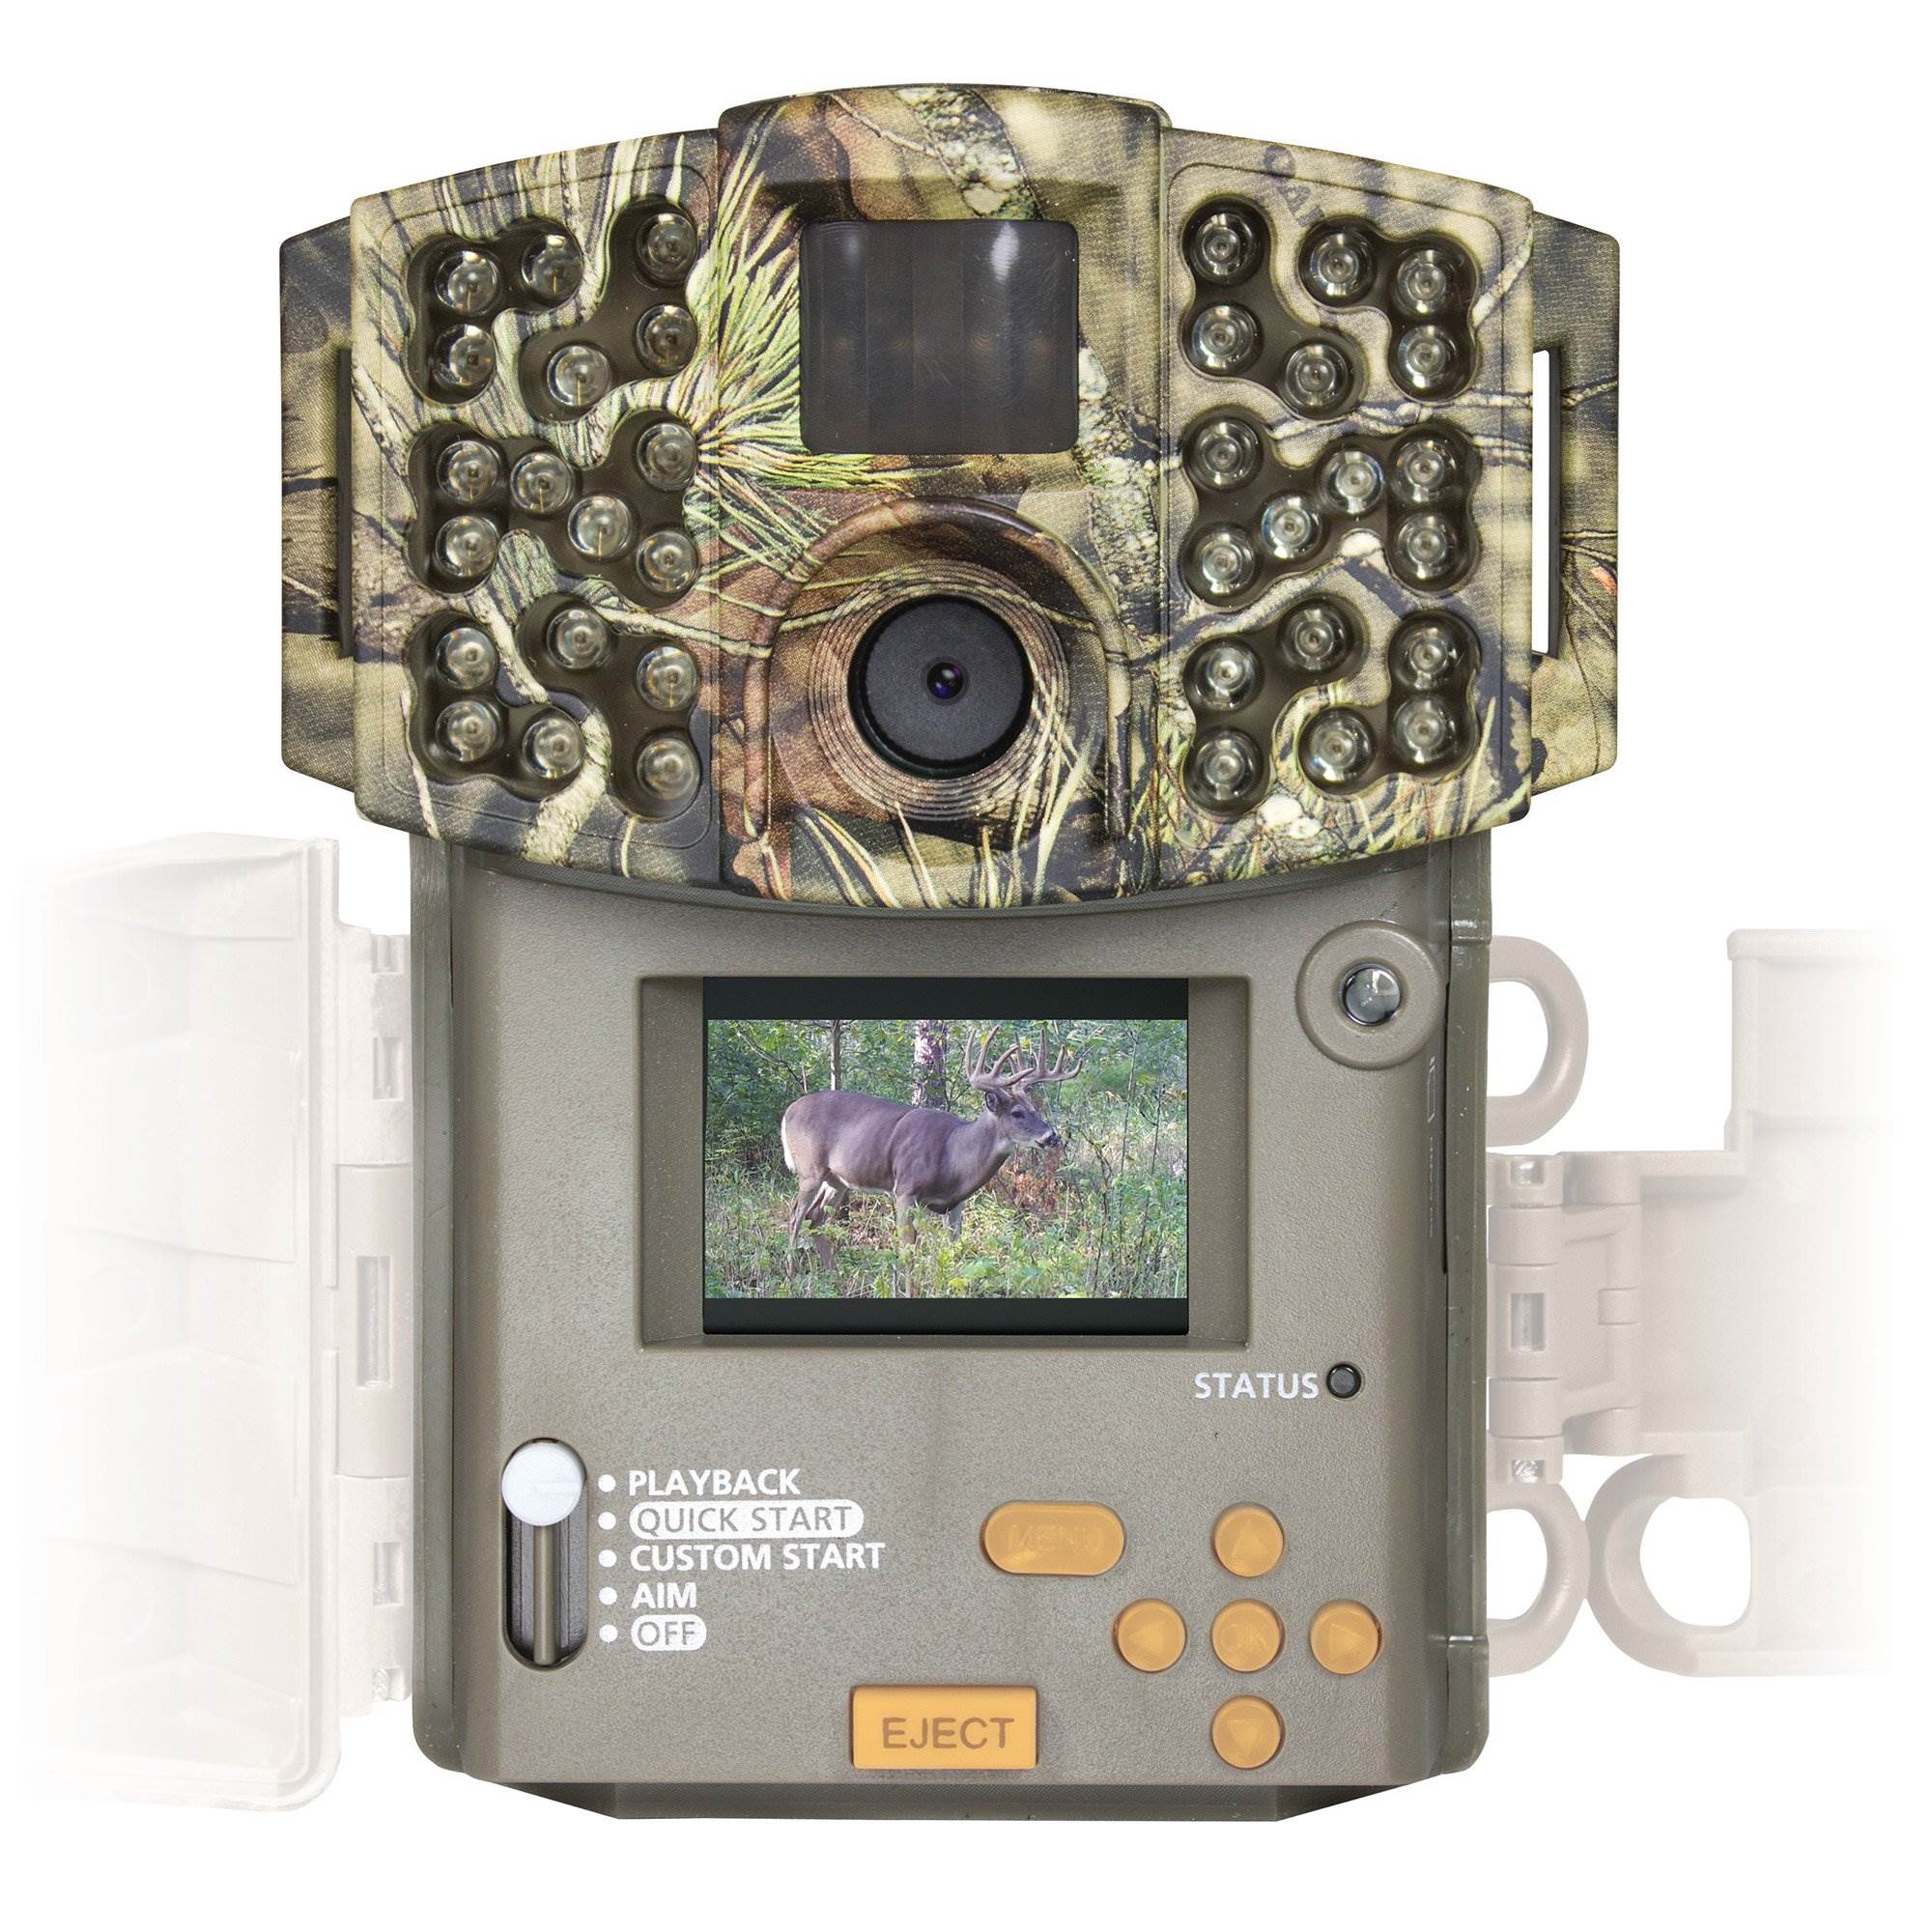 Moultrie M-999i 20 Mega Pixel Game Camera, Mossy Oak Country - image 4 of 5